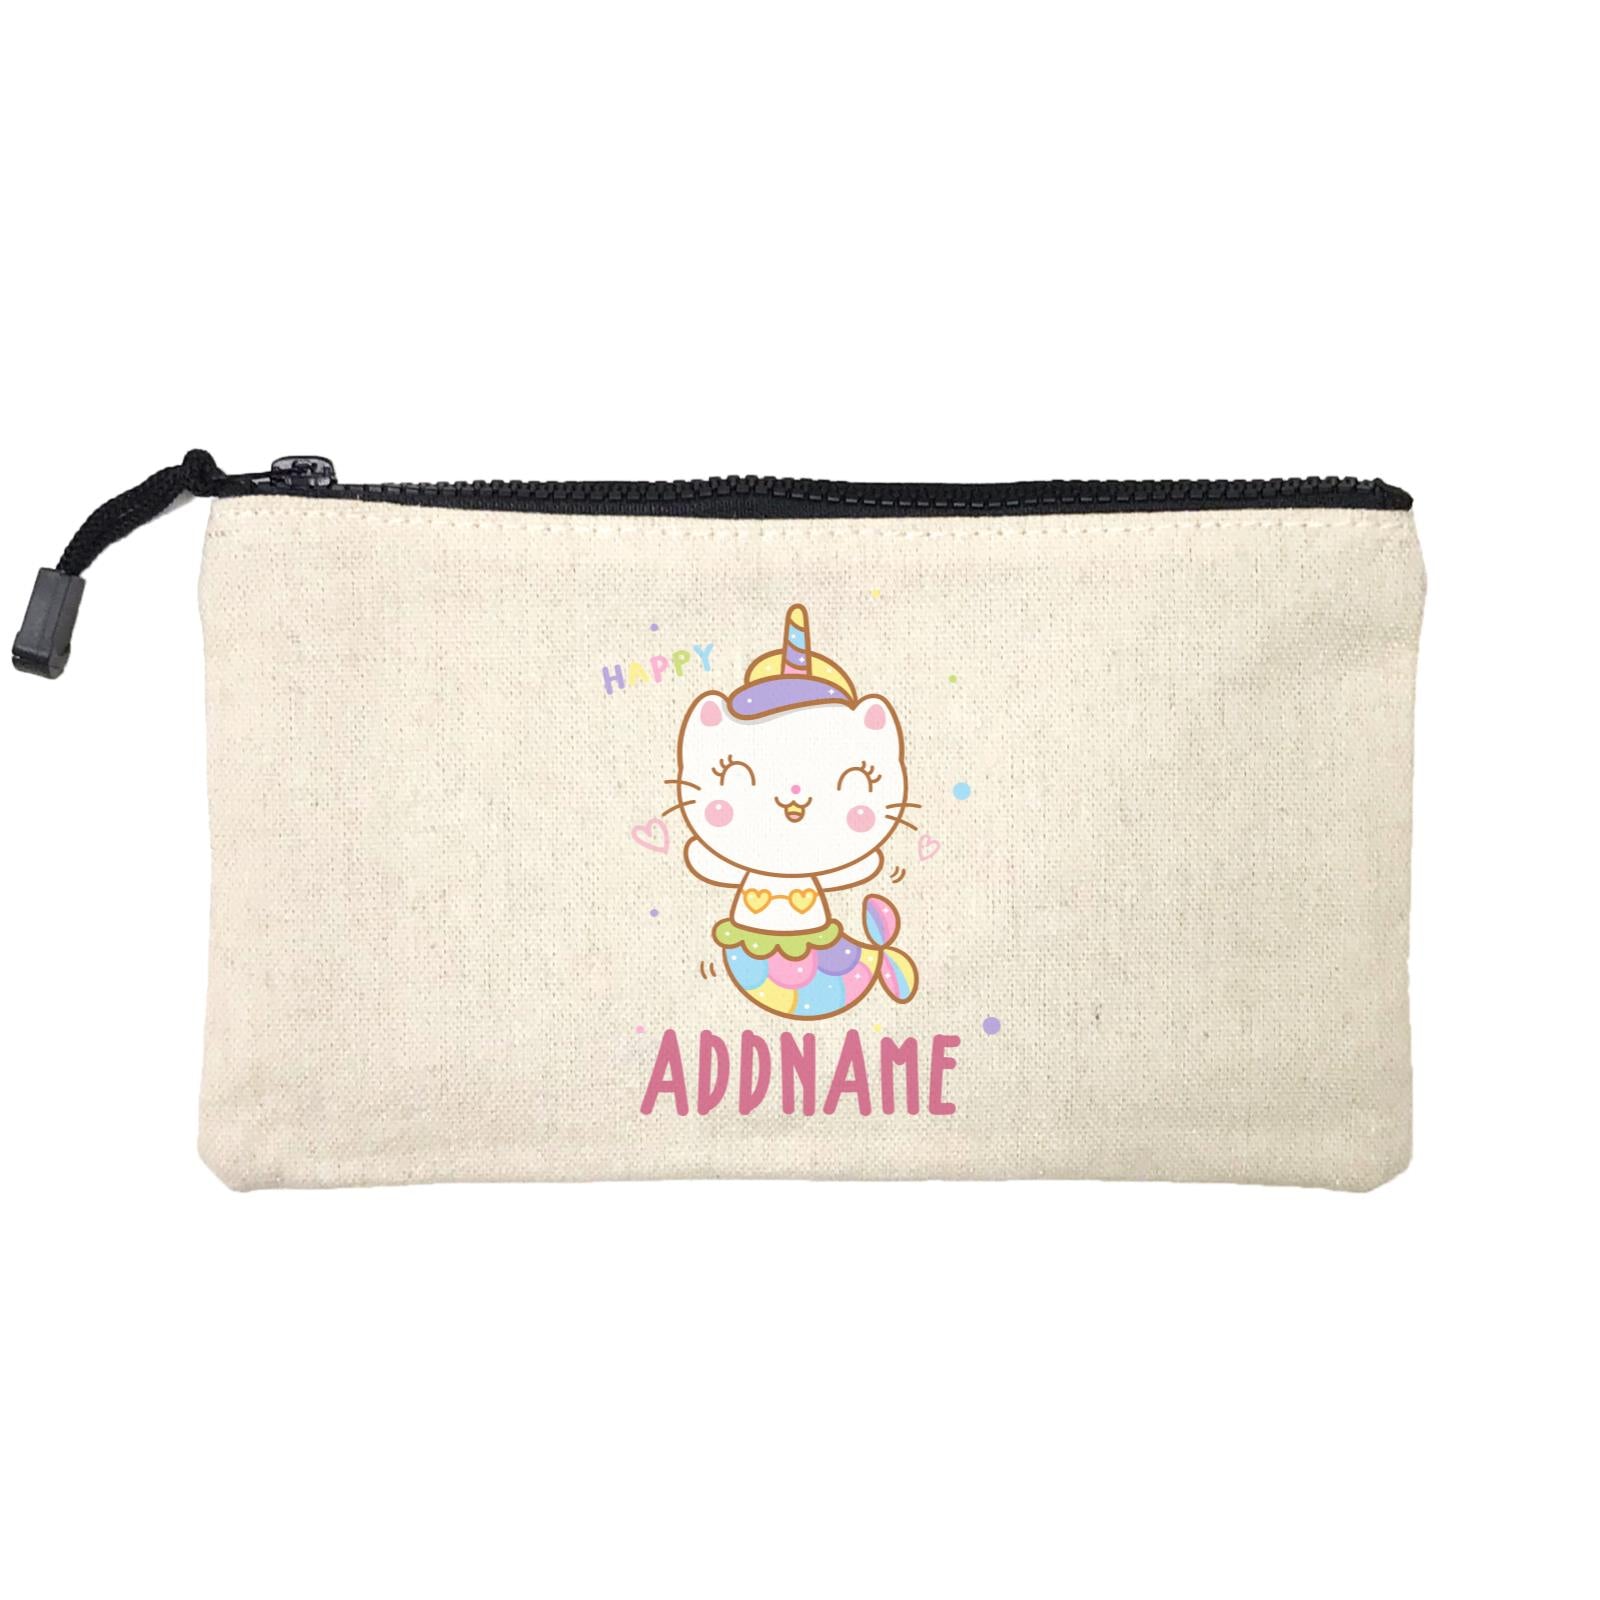 Unicorn And Princess Series Cute Happy Cat Mermaid Addname Mini Accessories Stationery Pouch